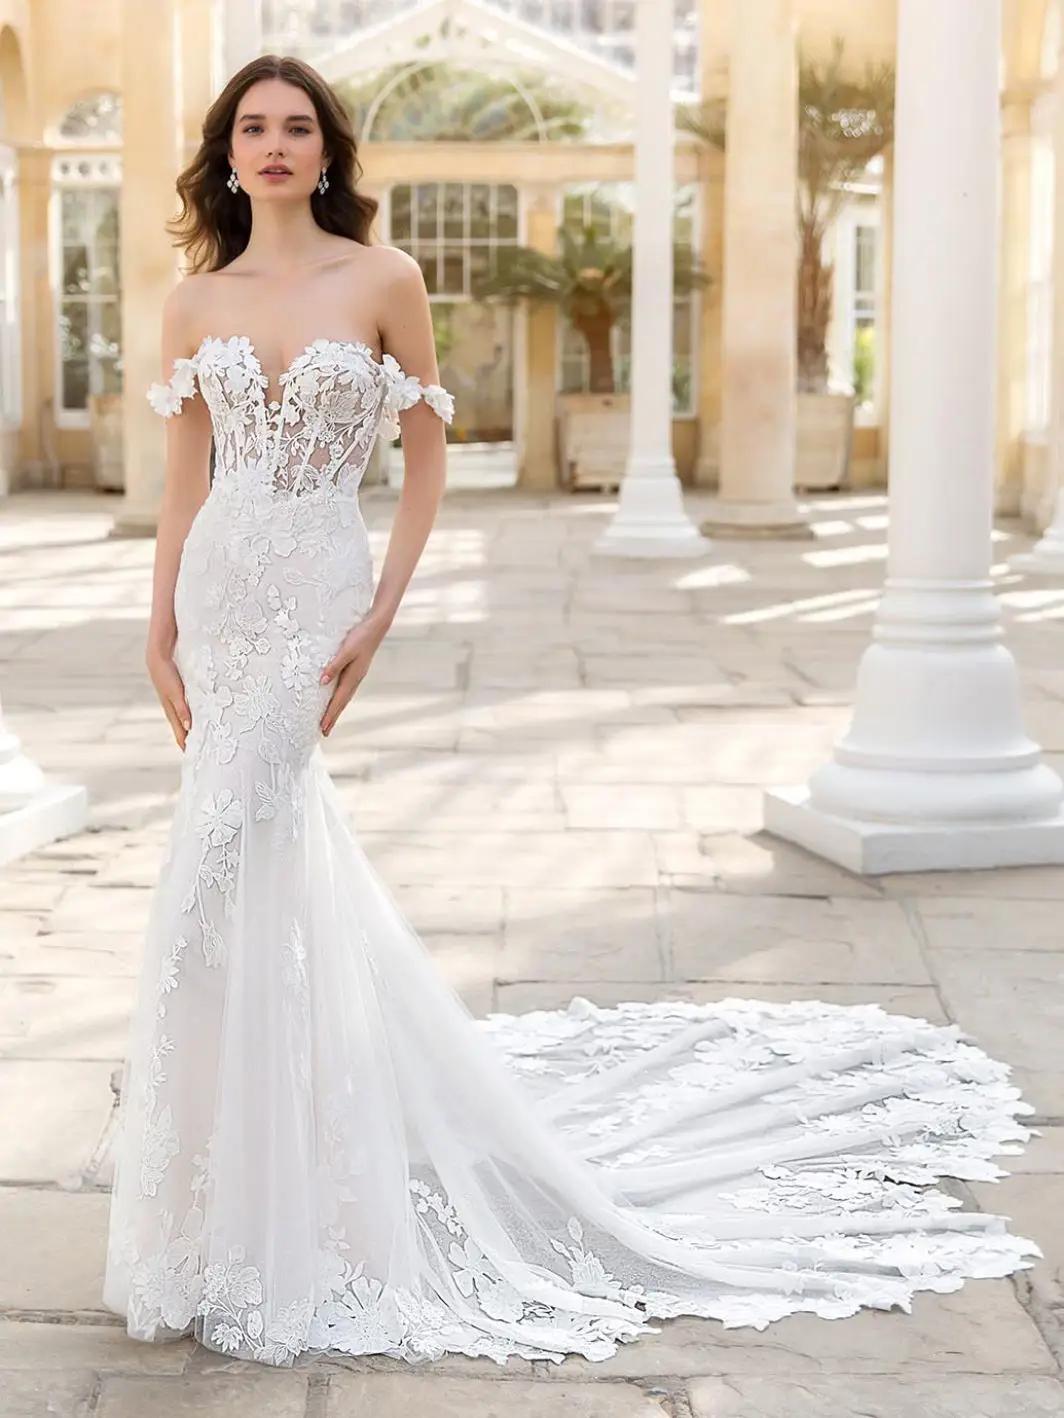 Stunning Gowns for Your Summer Wedding Image